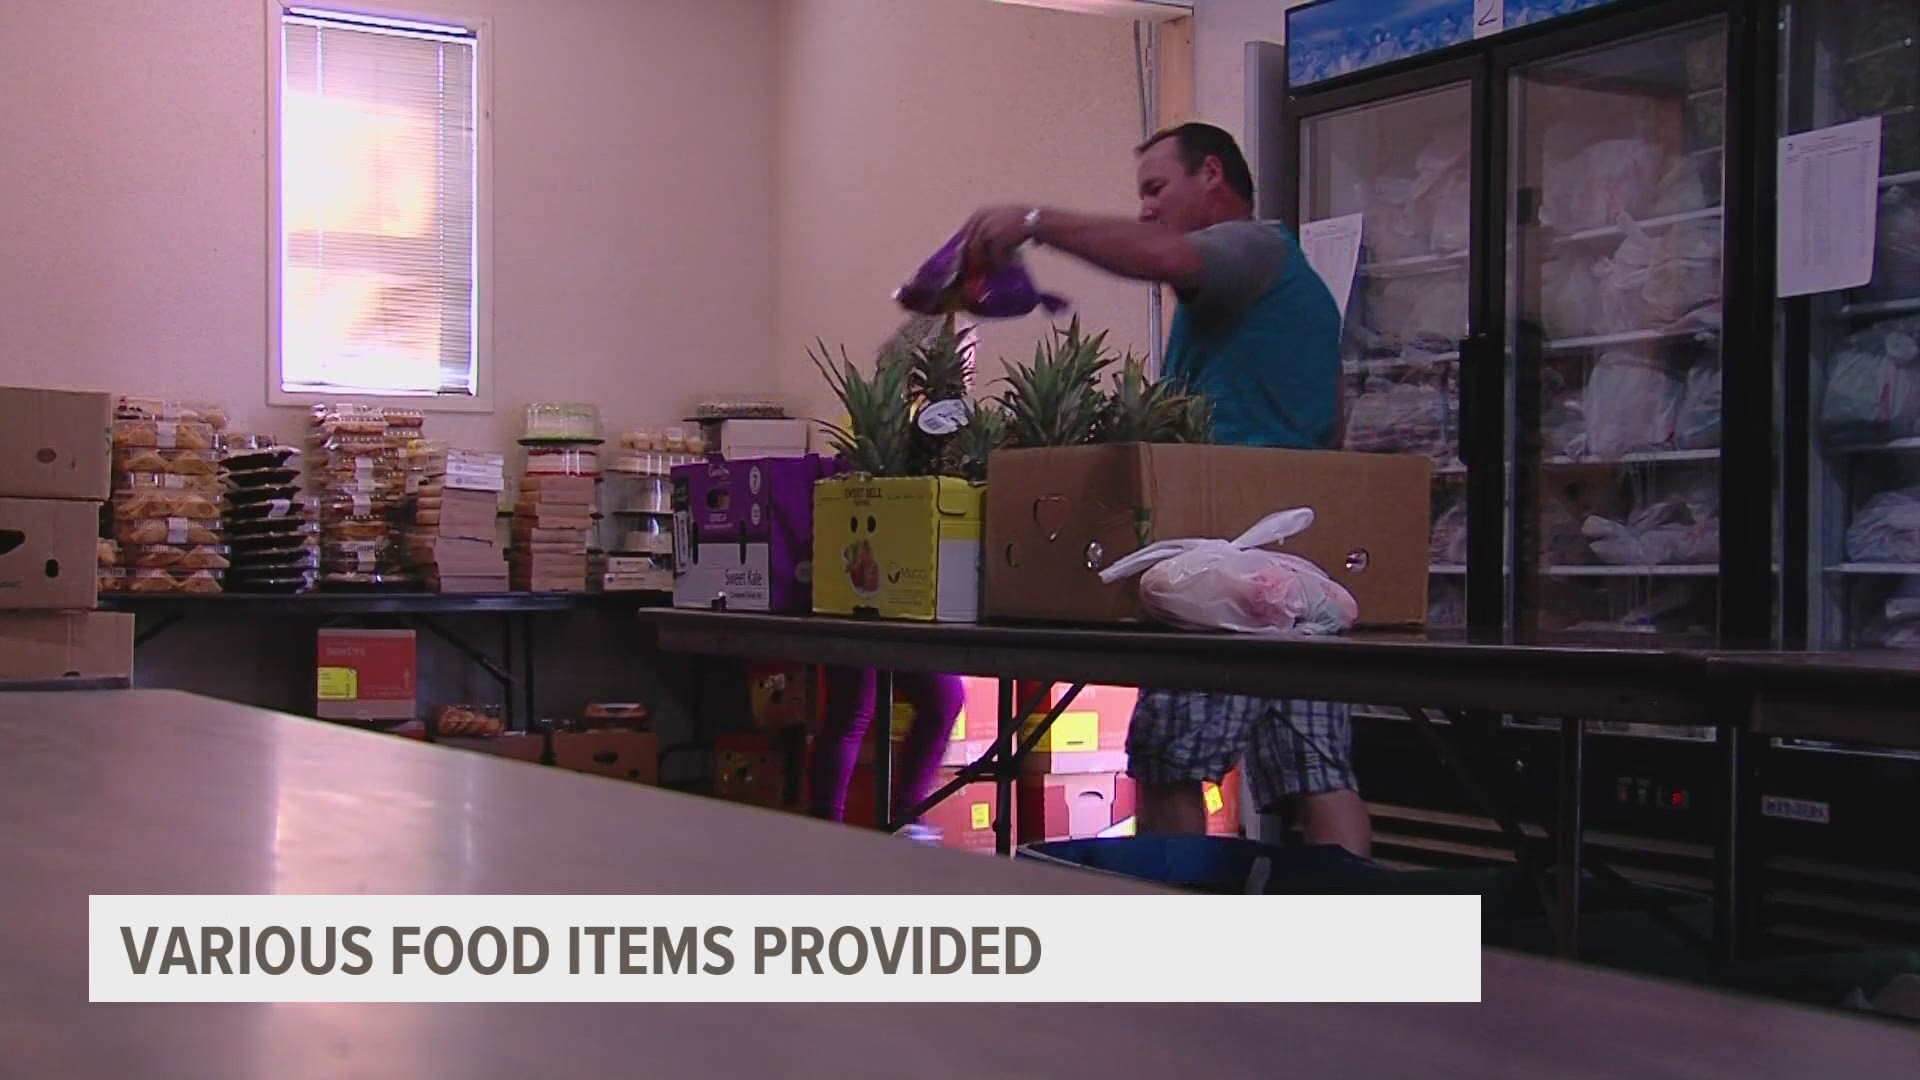 The organization is run by the Food Bank of Iowa and feeds between 350-400 families every Tuesday.